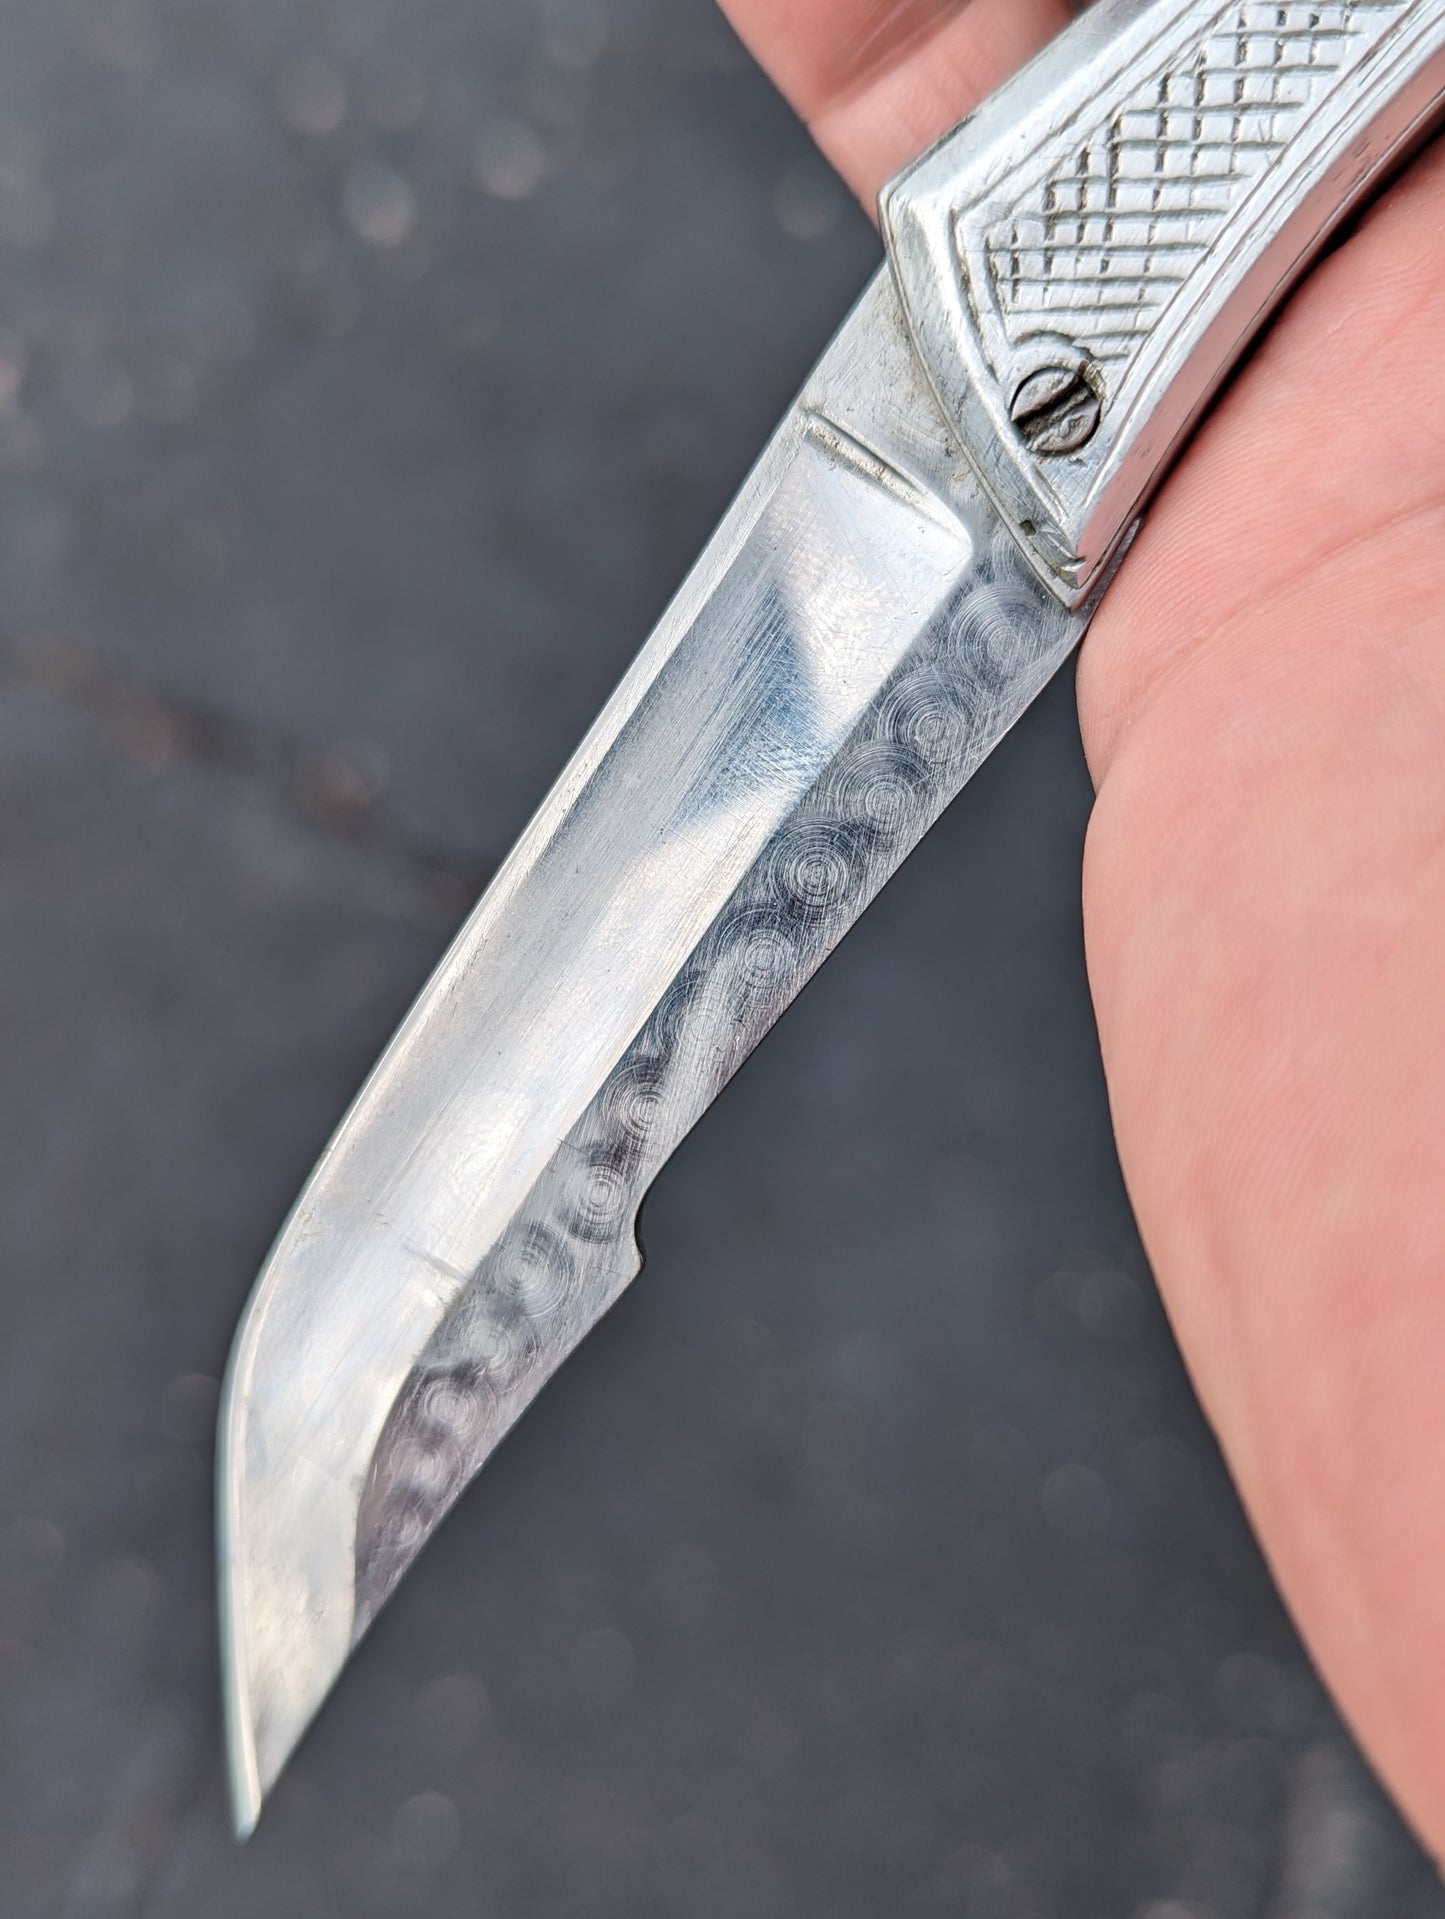 Engraved "Roman" Stainless Russian Prison Made Automatic Knife